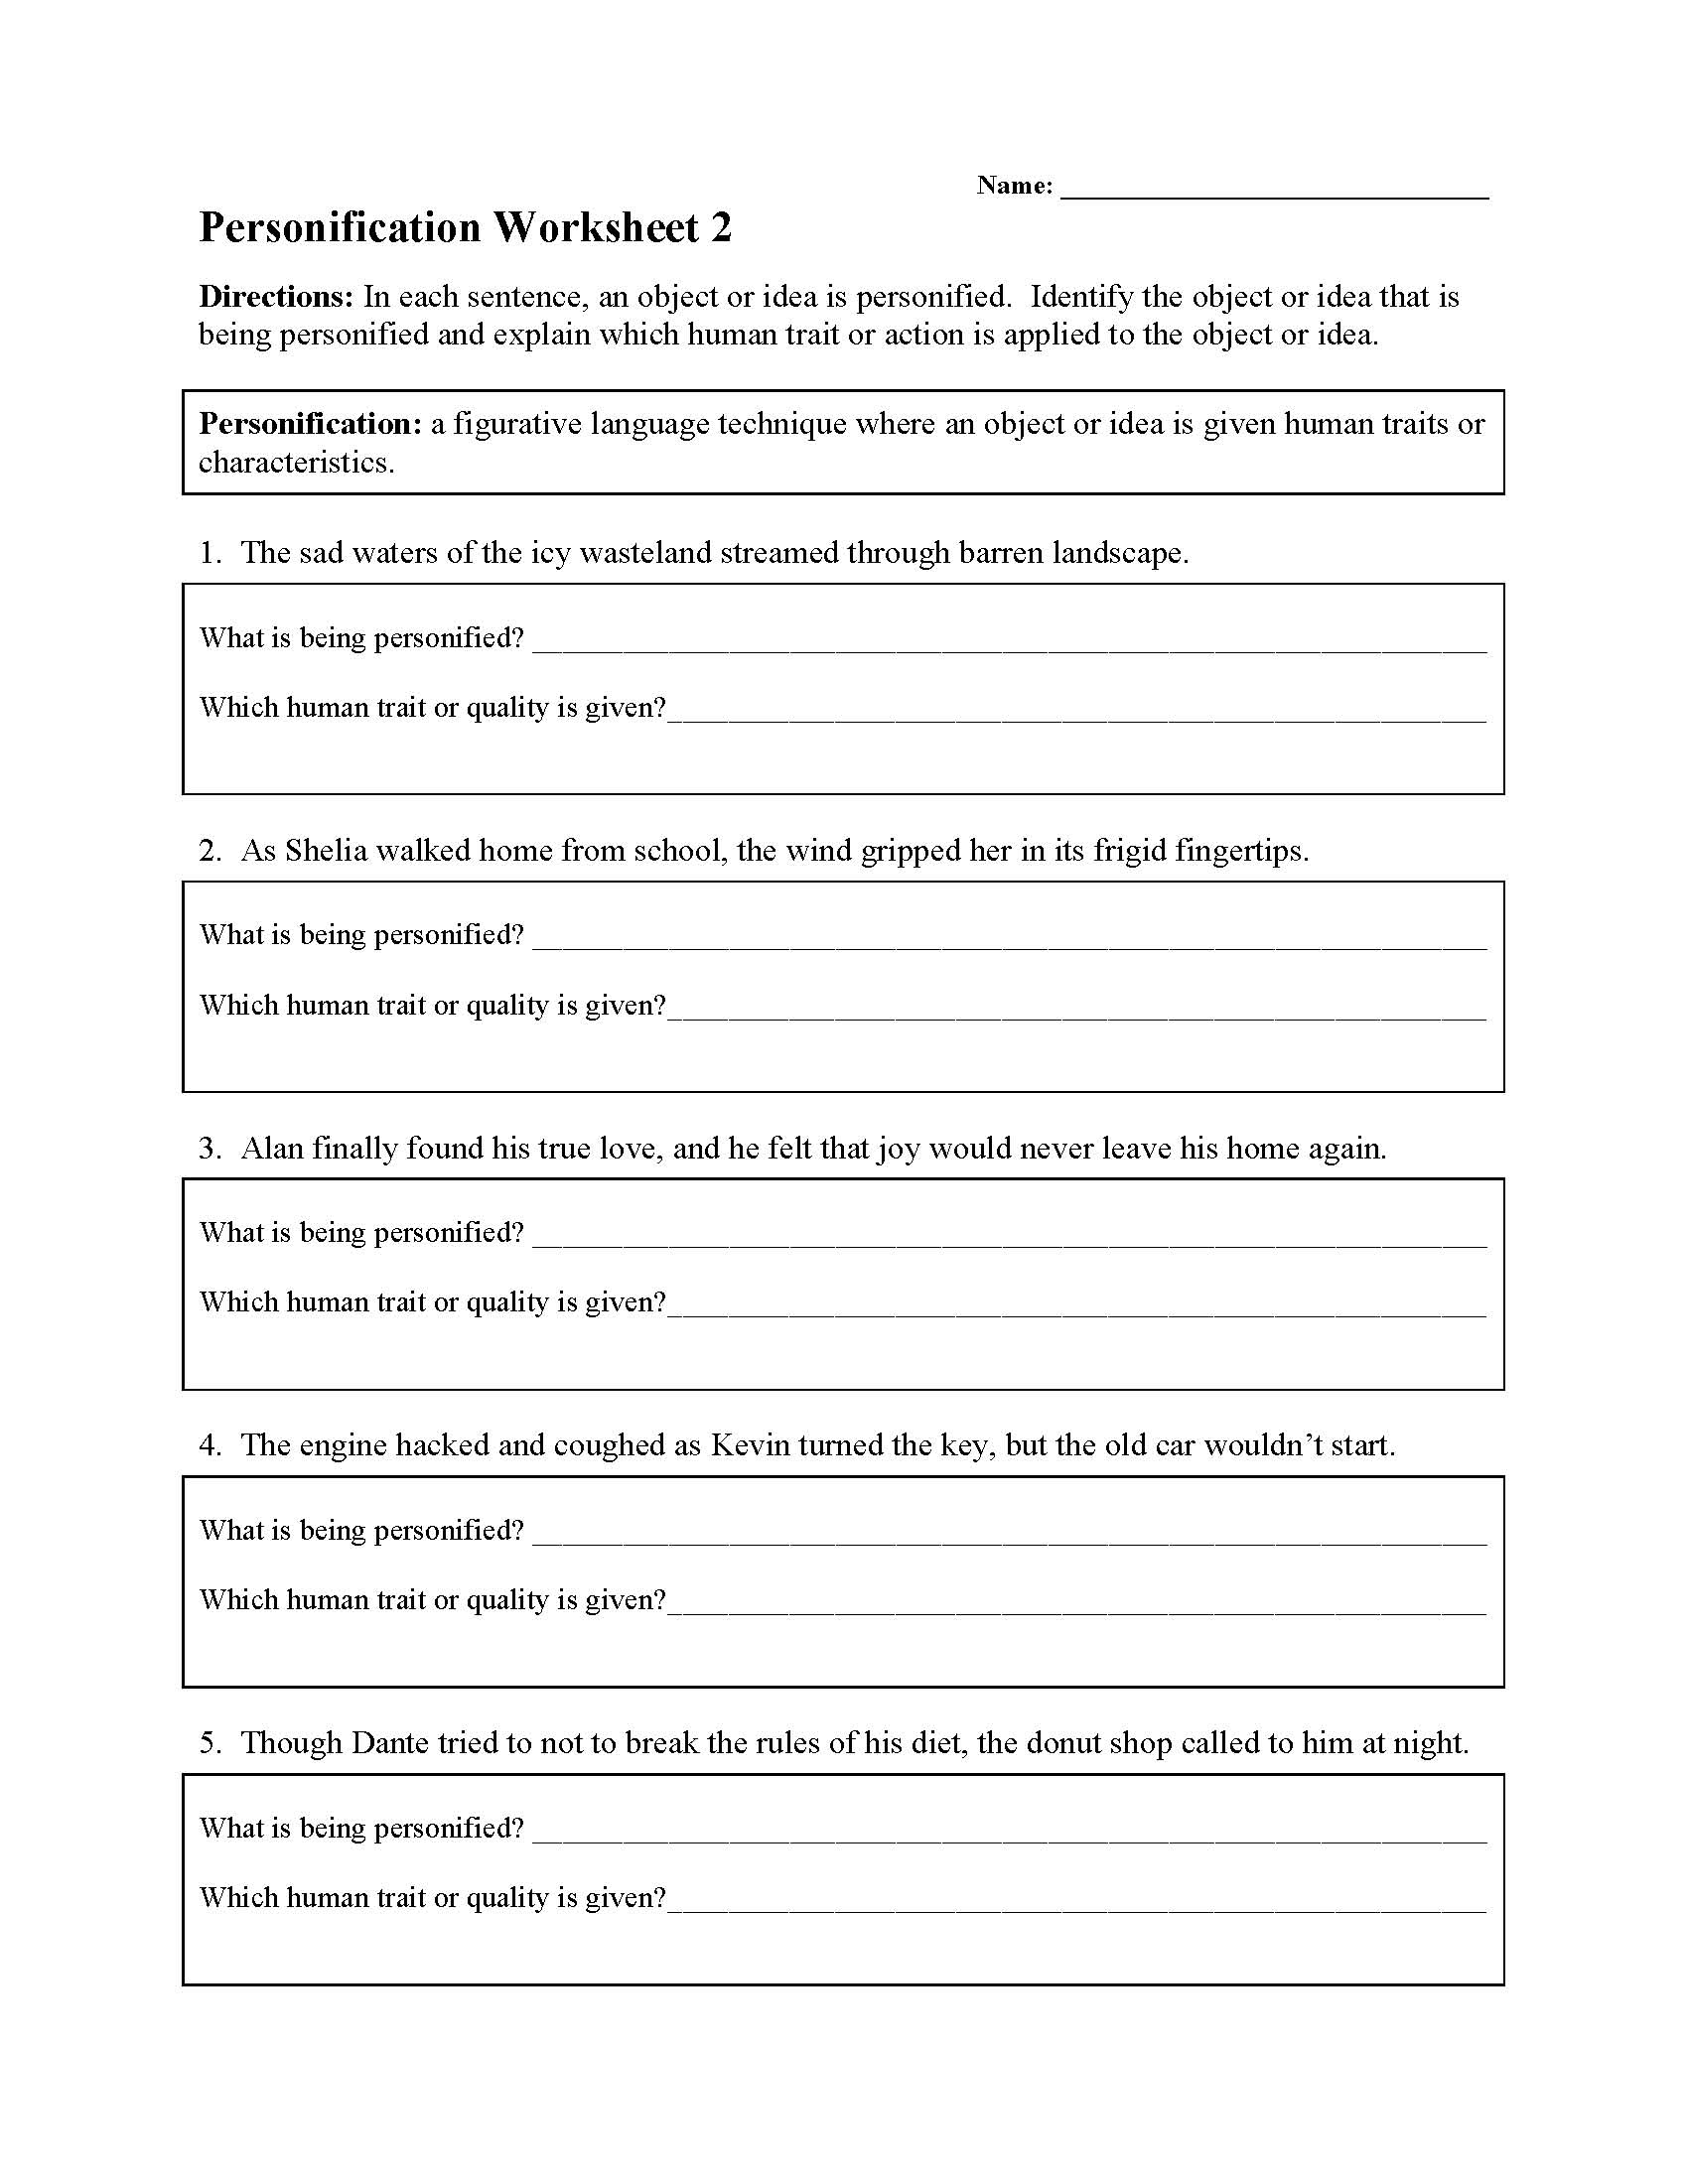 This is a preview image of Personification Worksheet 2. Click on it to enlarge it or view the source file.